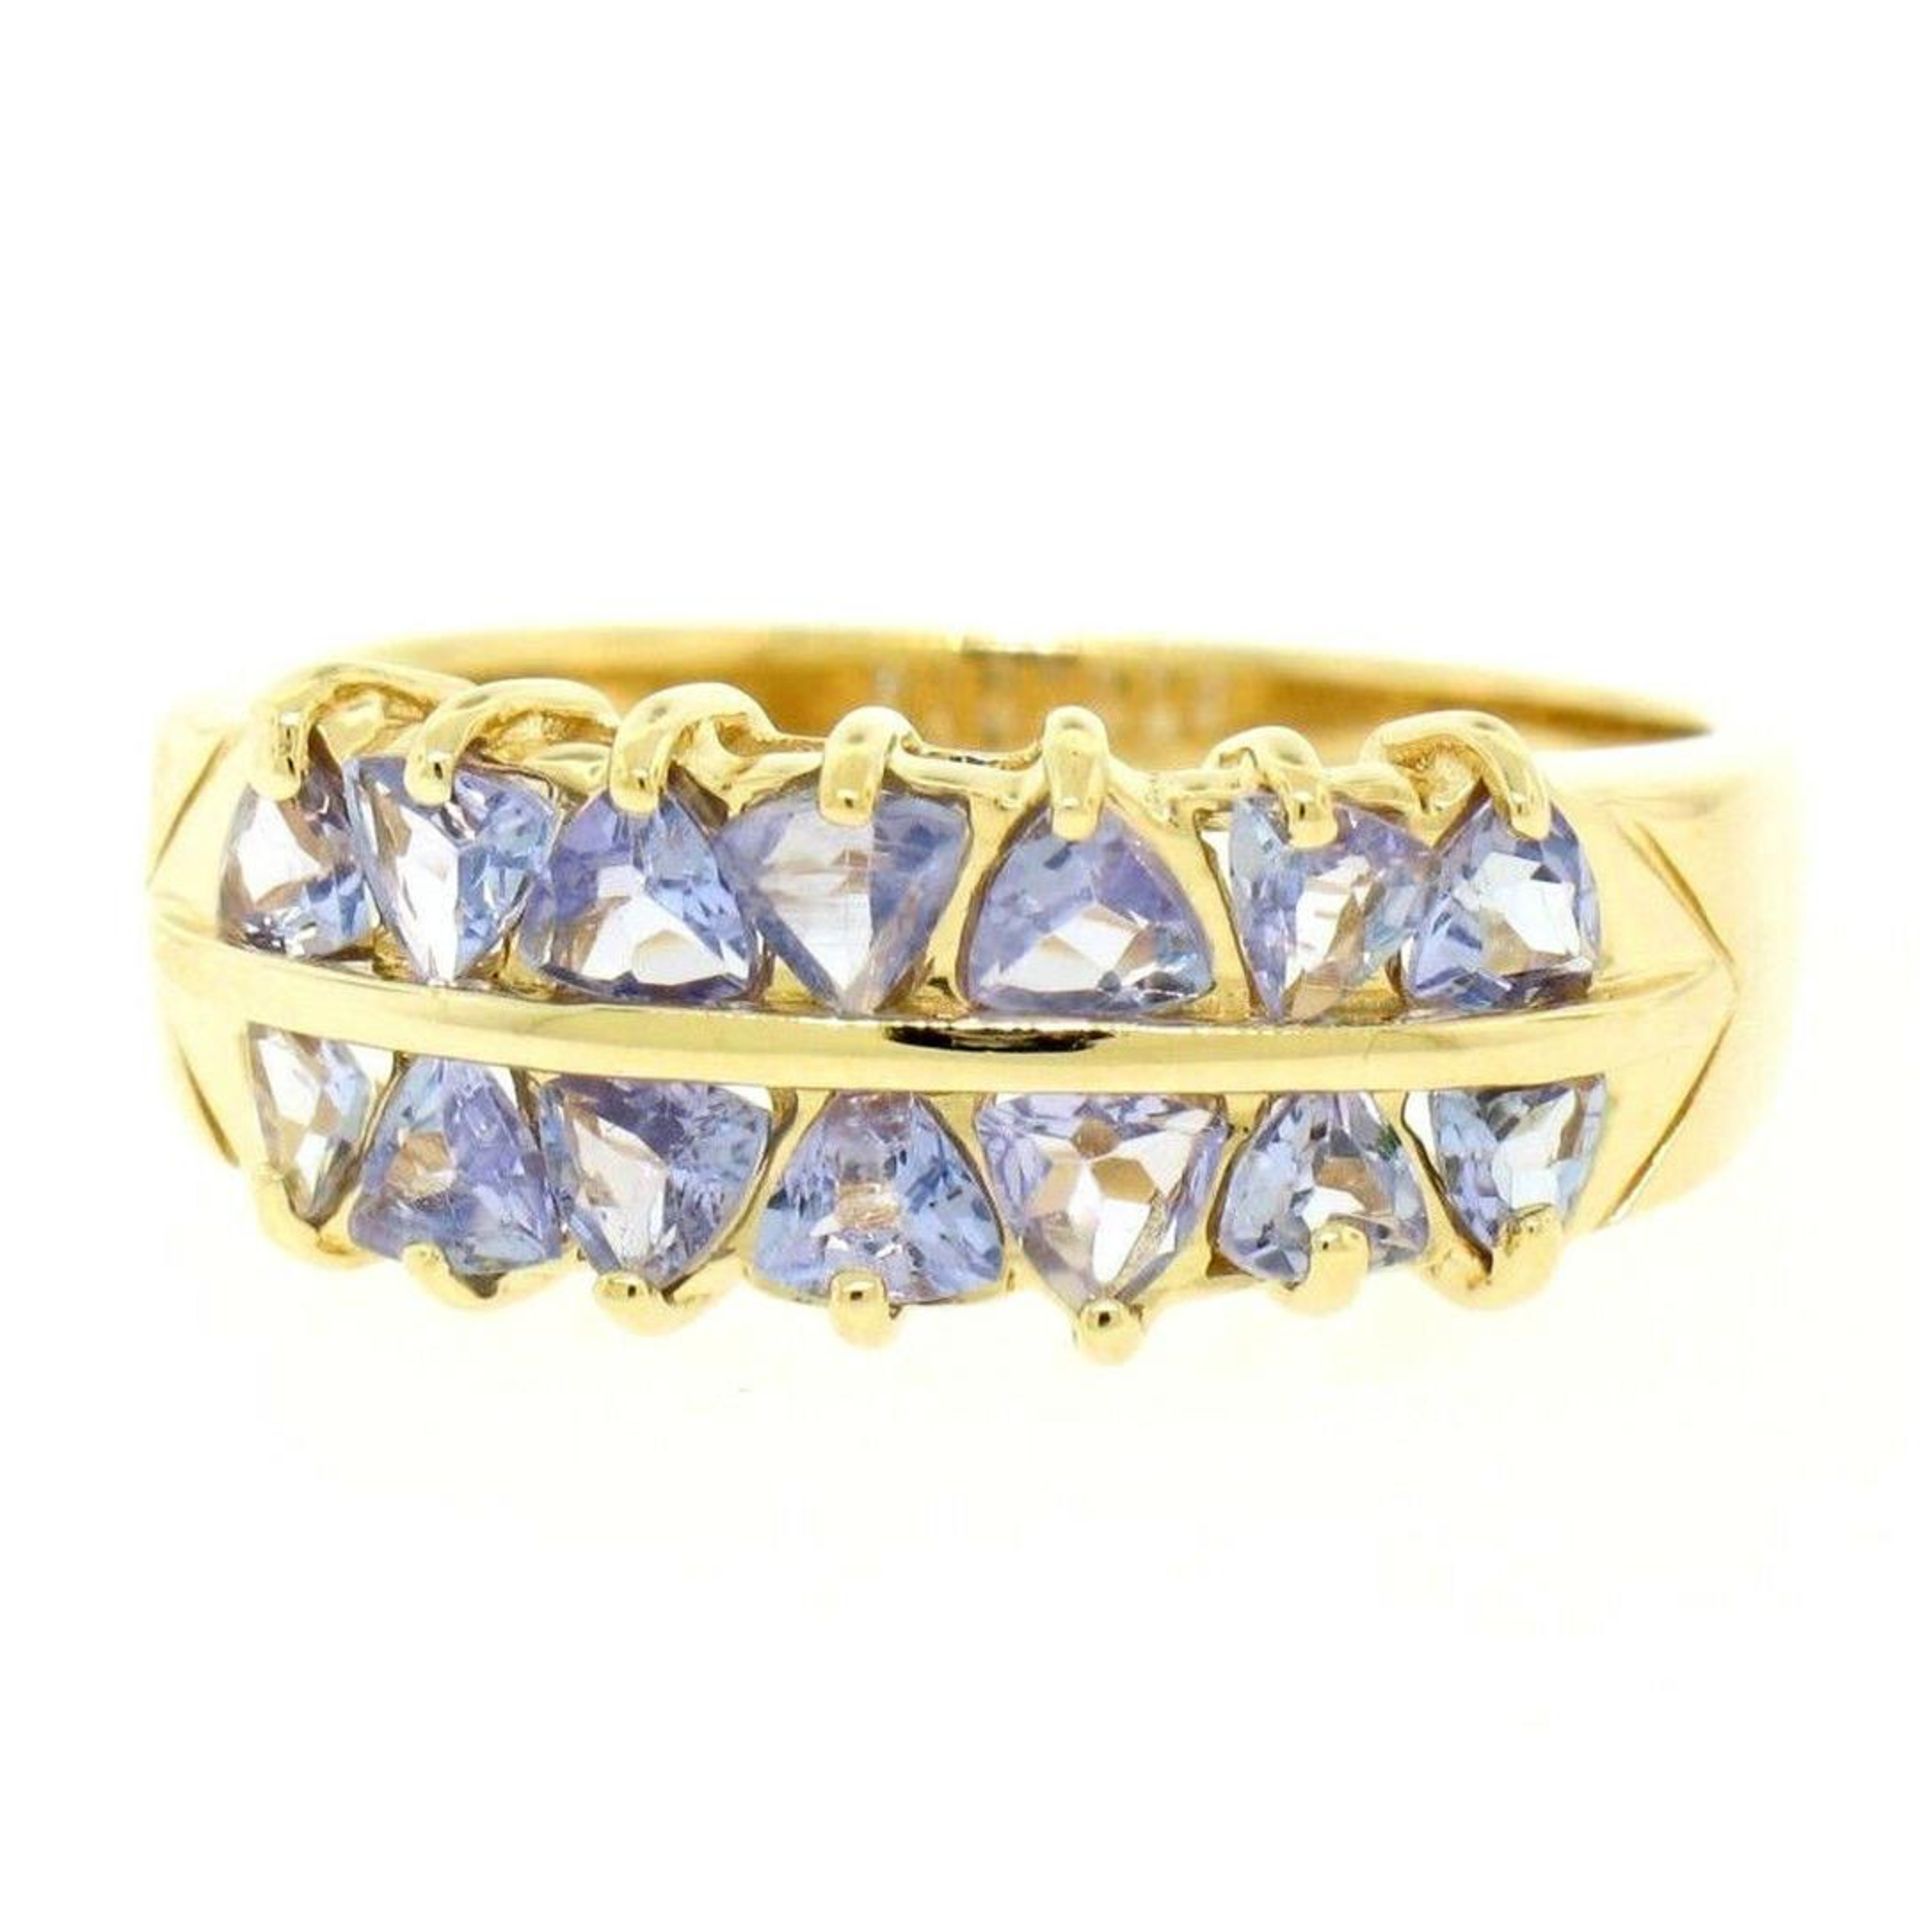 14k Yellow Gold Dual Two Row 1.40 ctw 14 Trillion Cut Natural Tanzanite Band Rin - Image 2 of 7